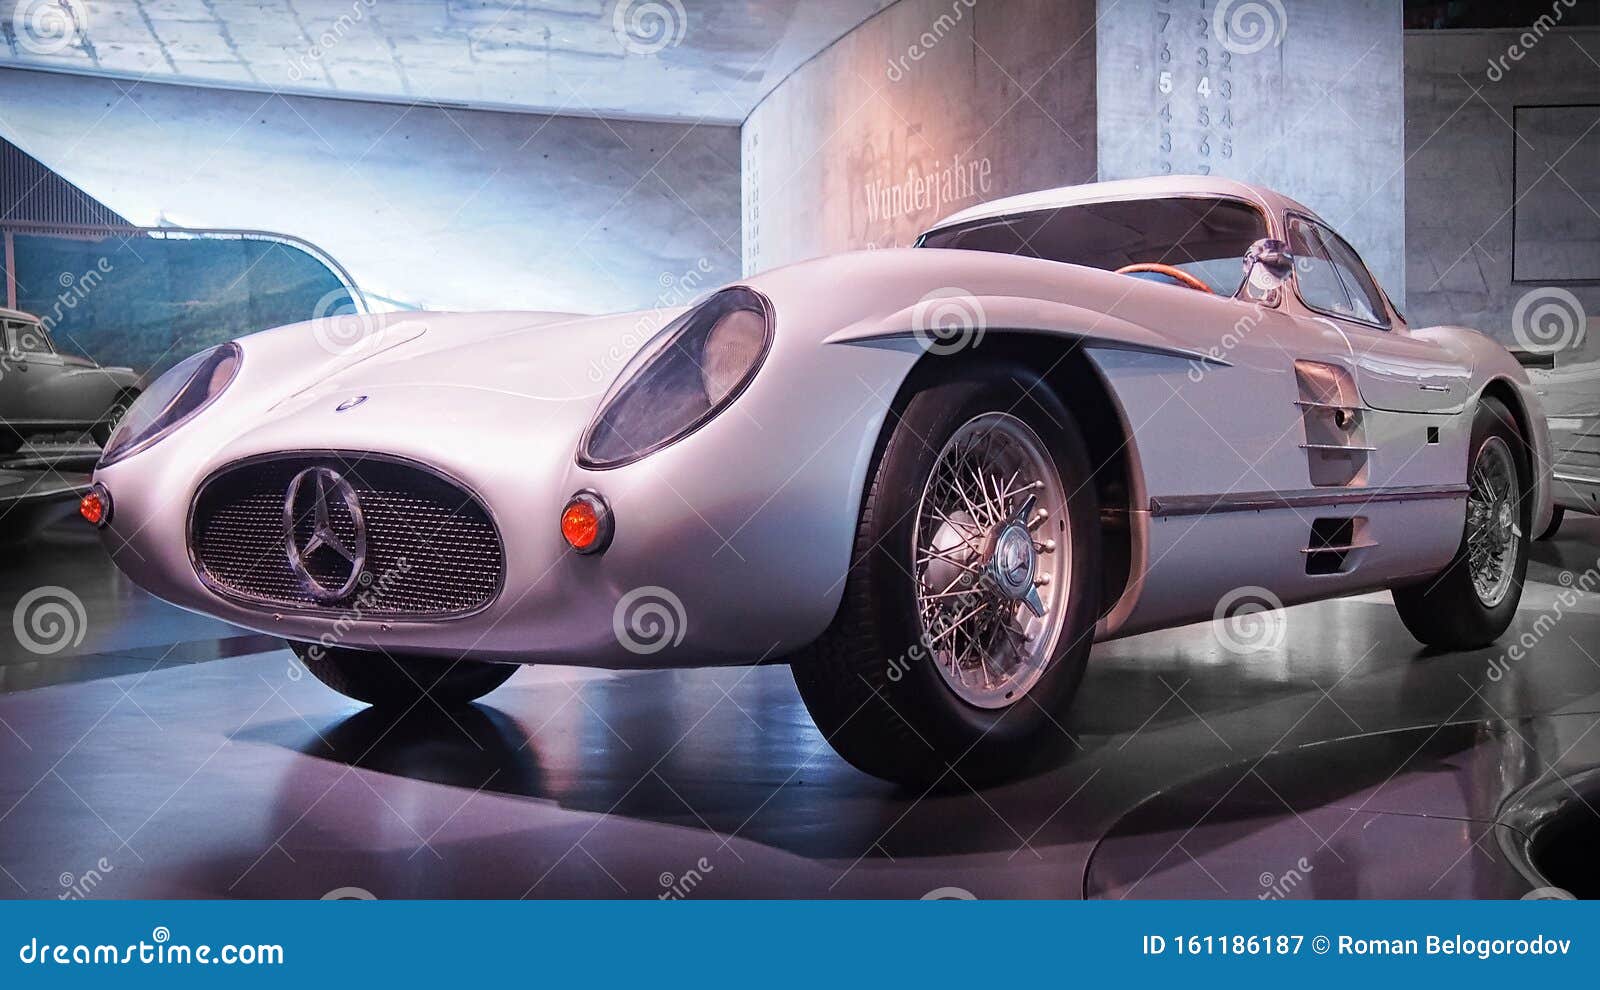 1955 Mercedes Benz 300 Slr Uhlenhaut Coupe Editorial Photography Image Of Autoshow Benz